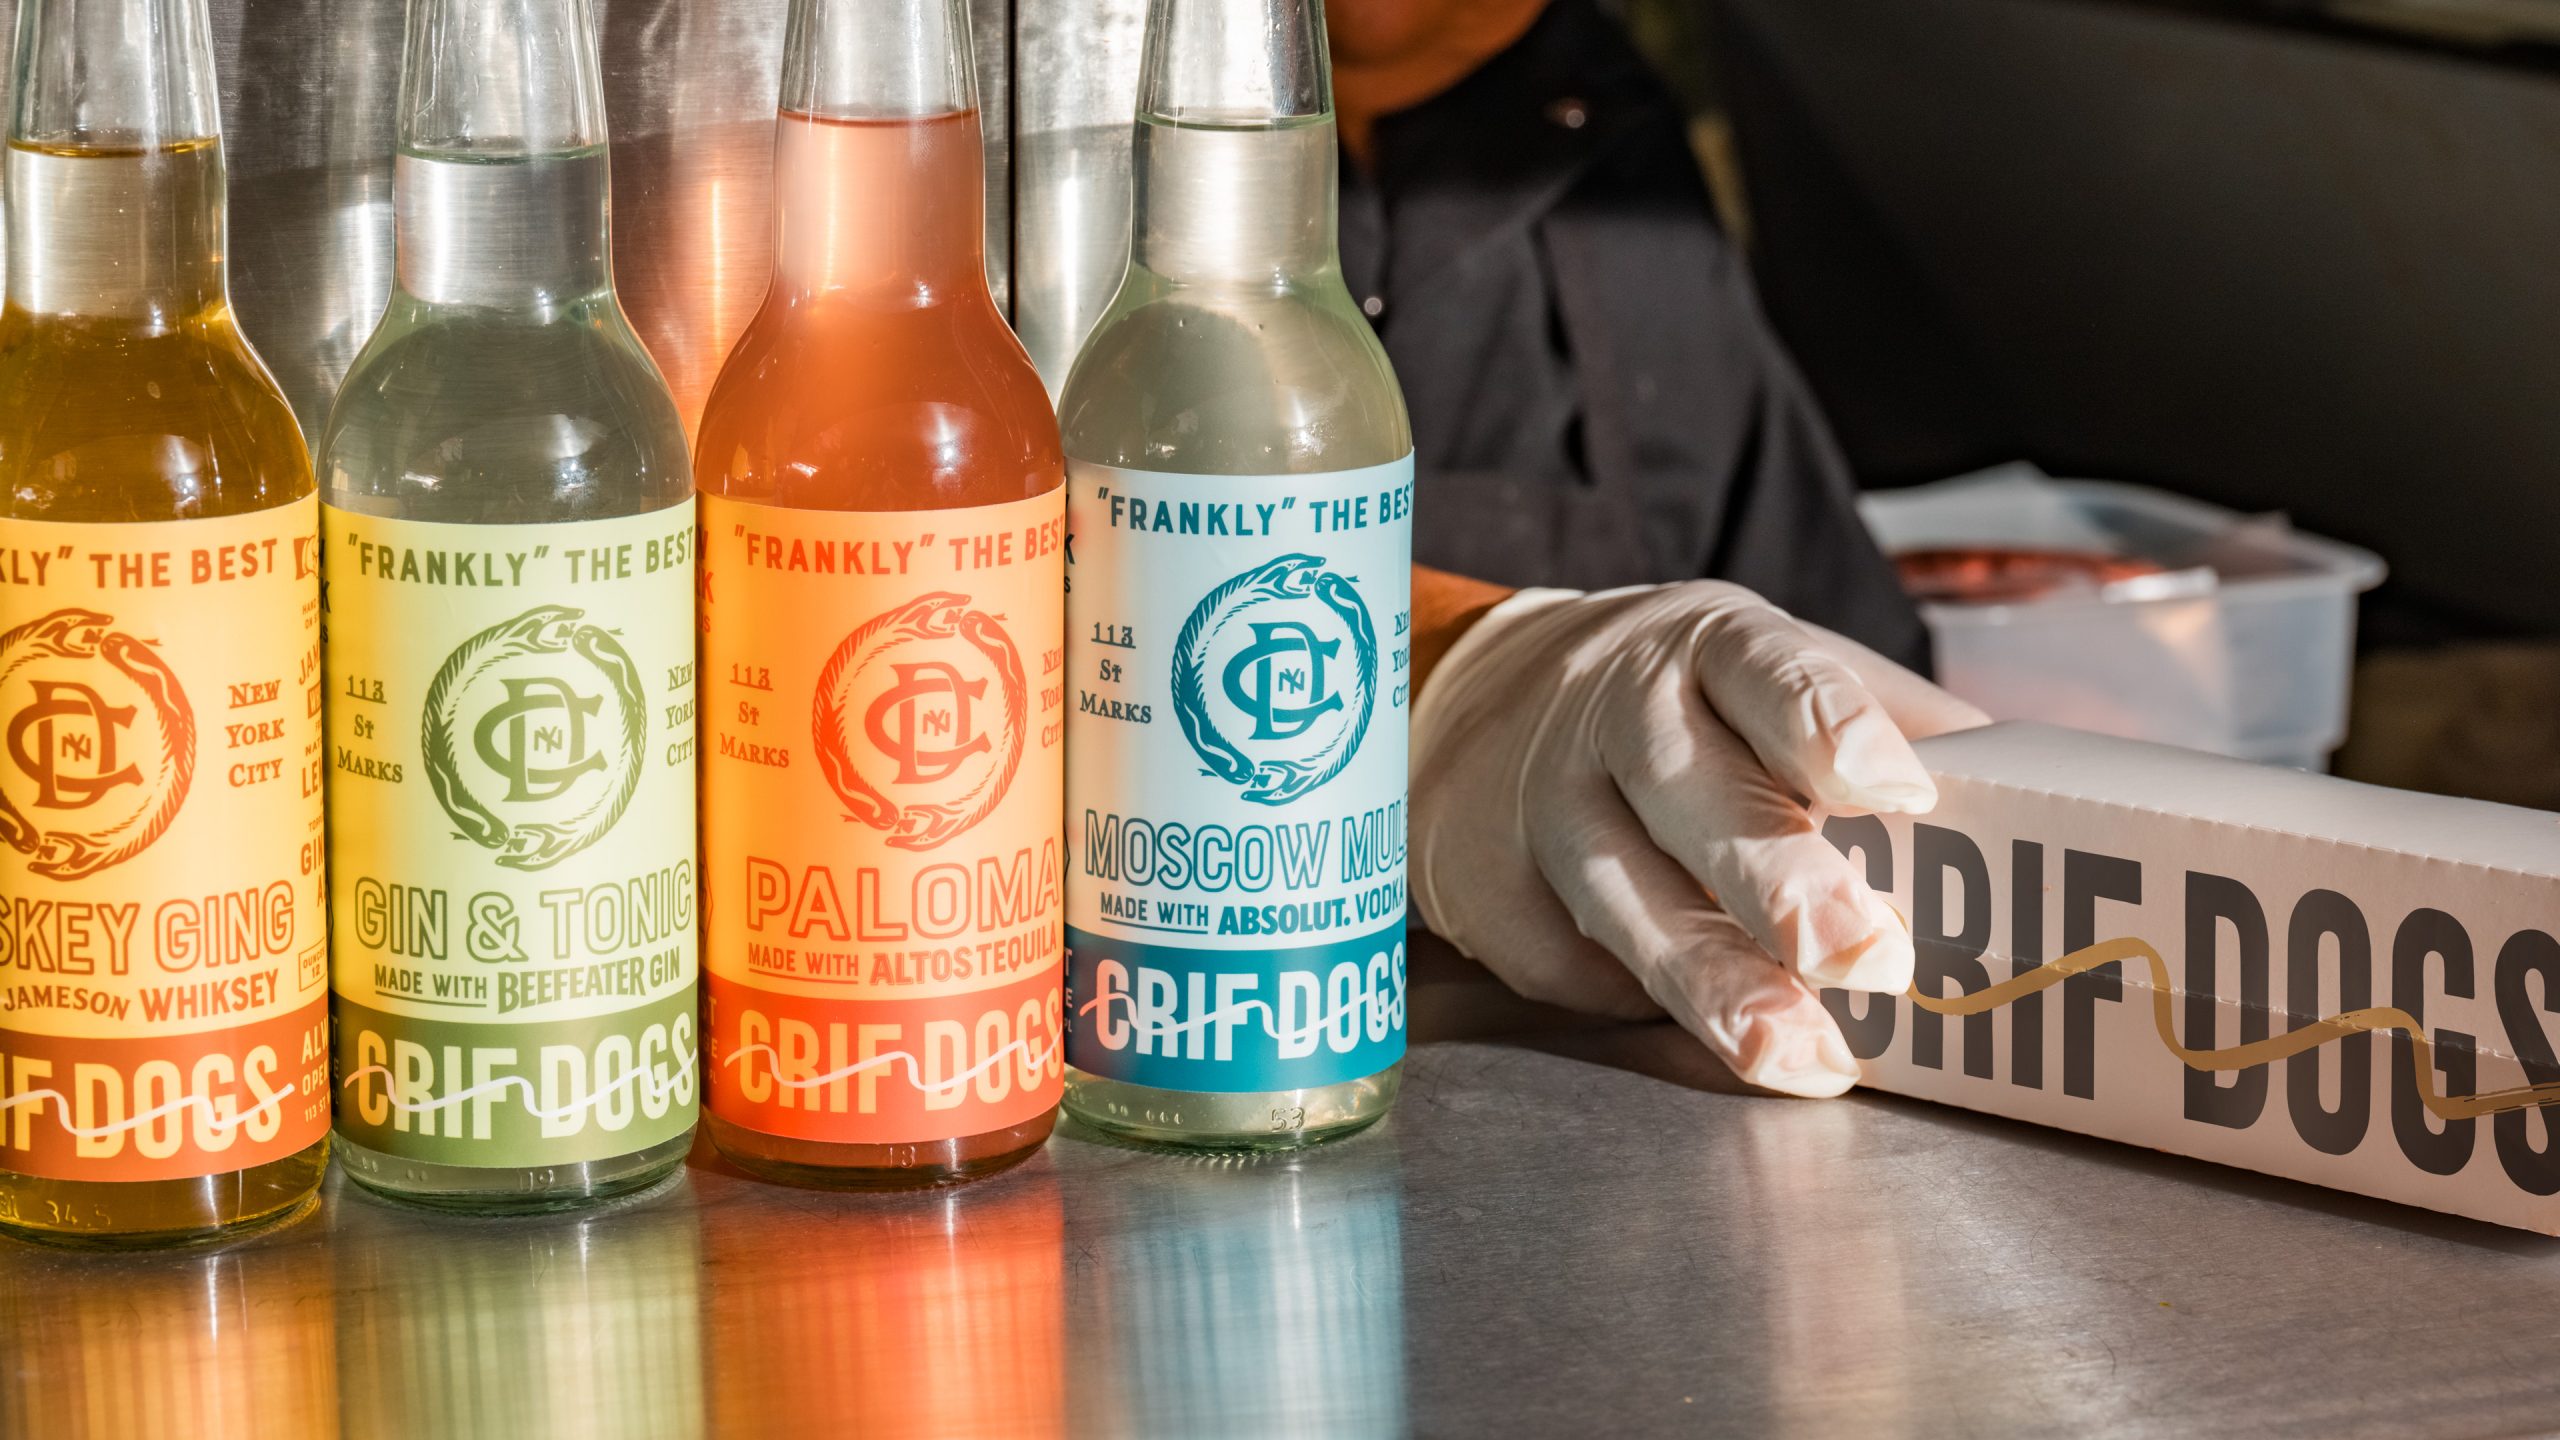 Crif Dogs and Please Don’t Tell Come Together for a Classically New York Bottled Cocktail Line